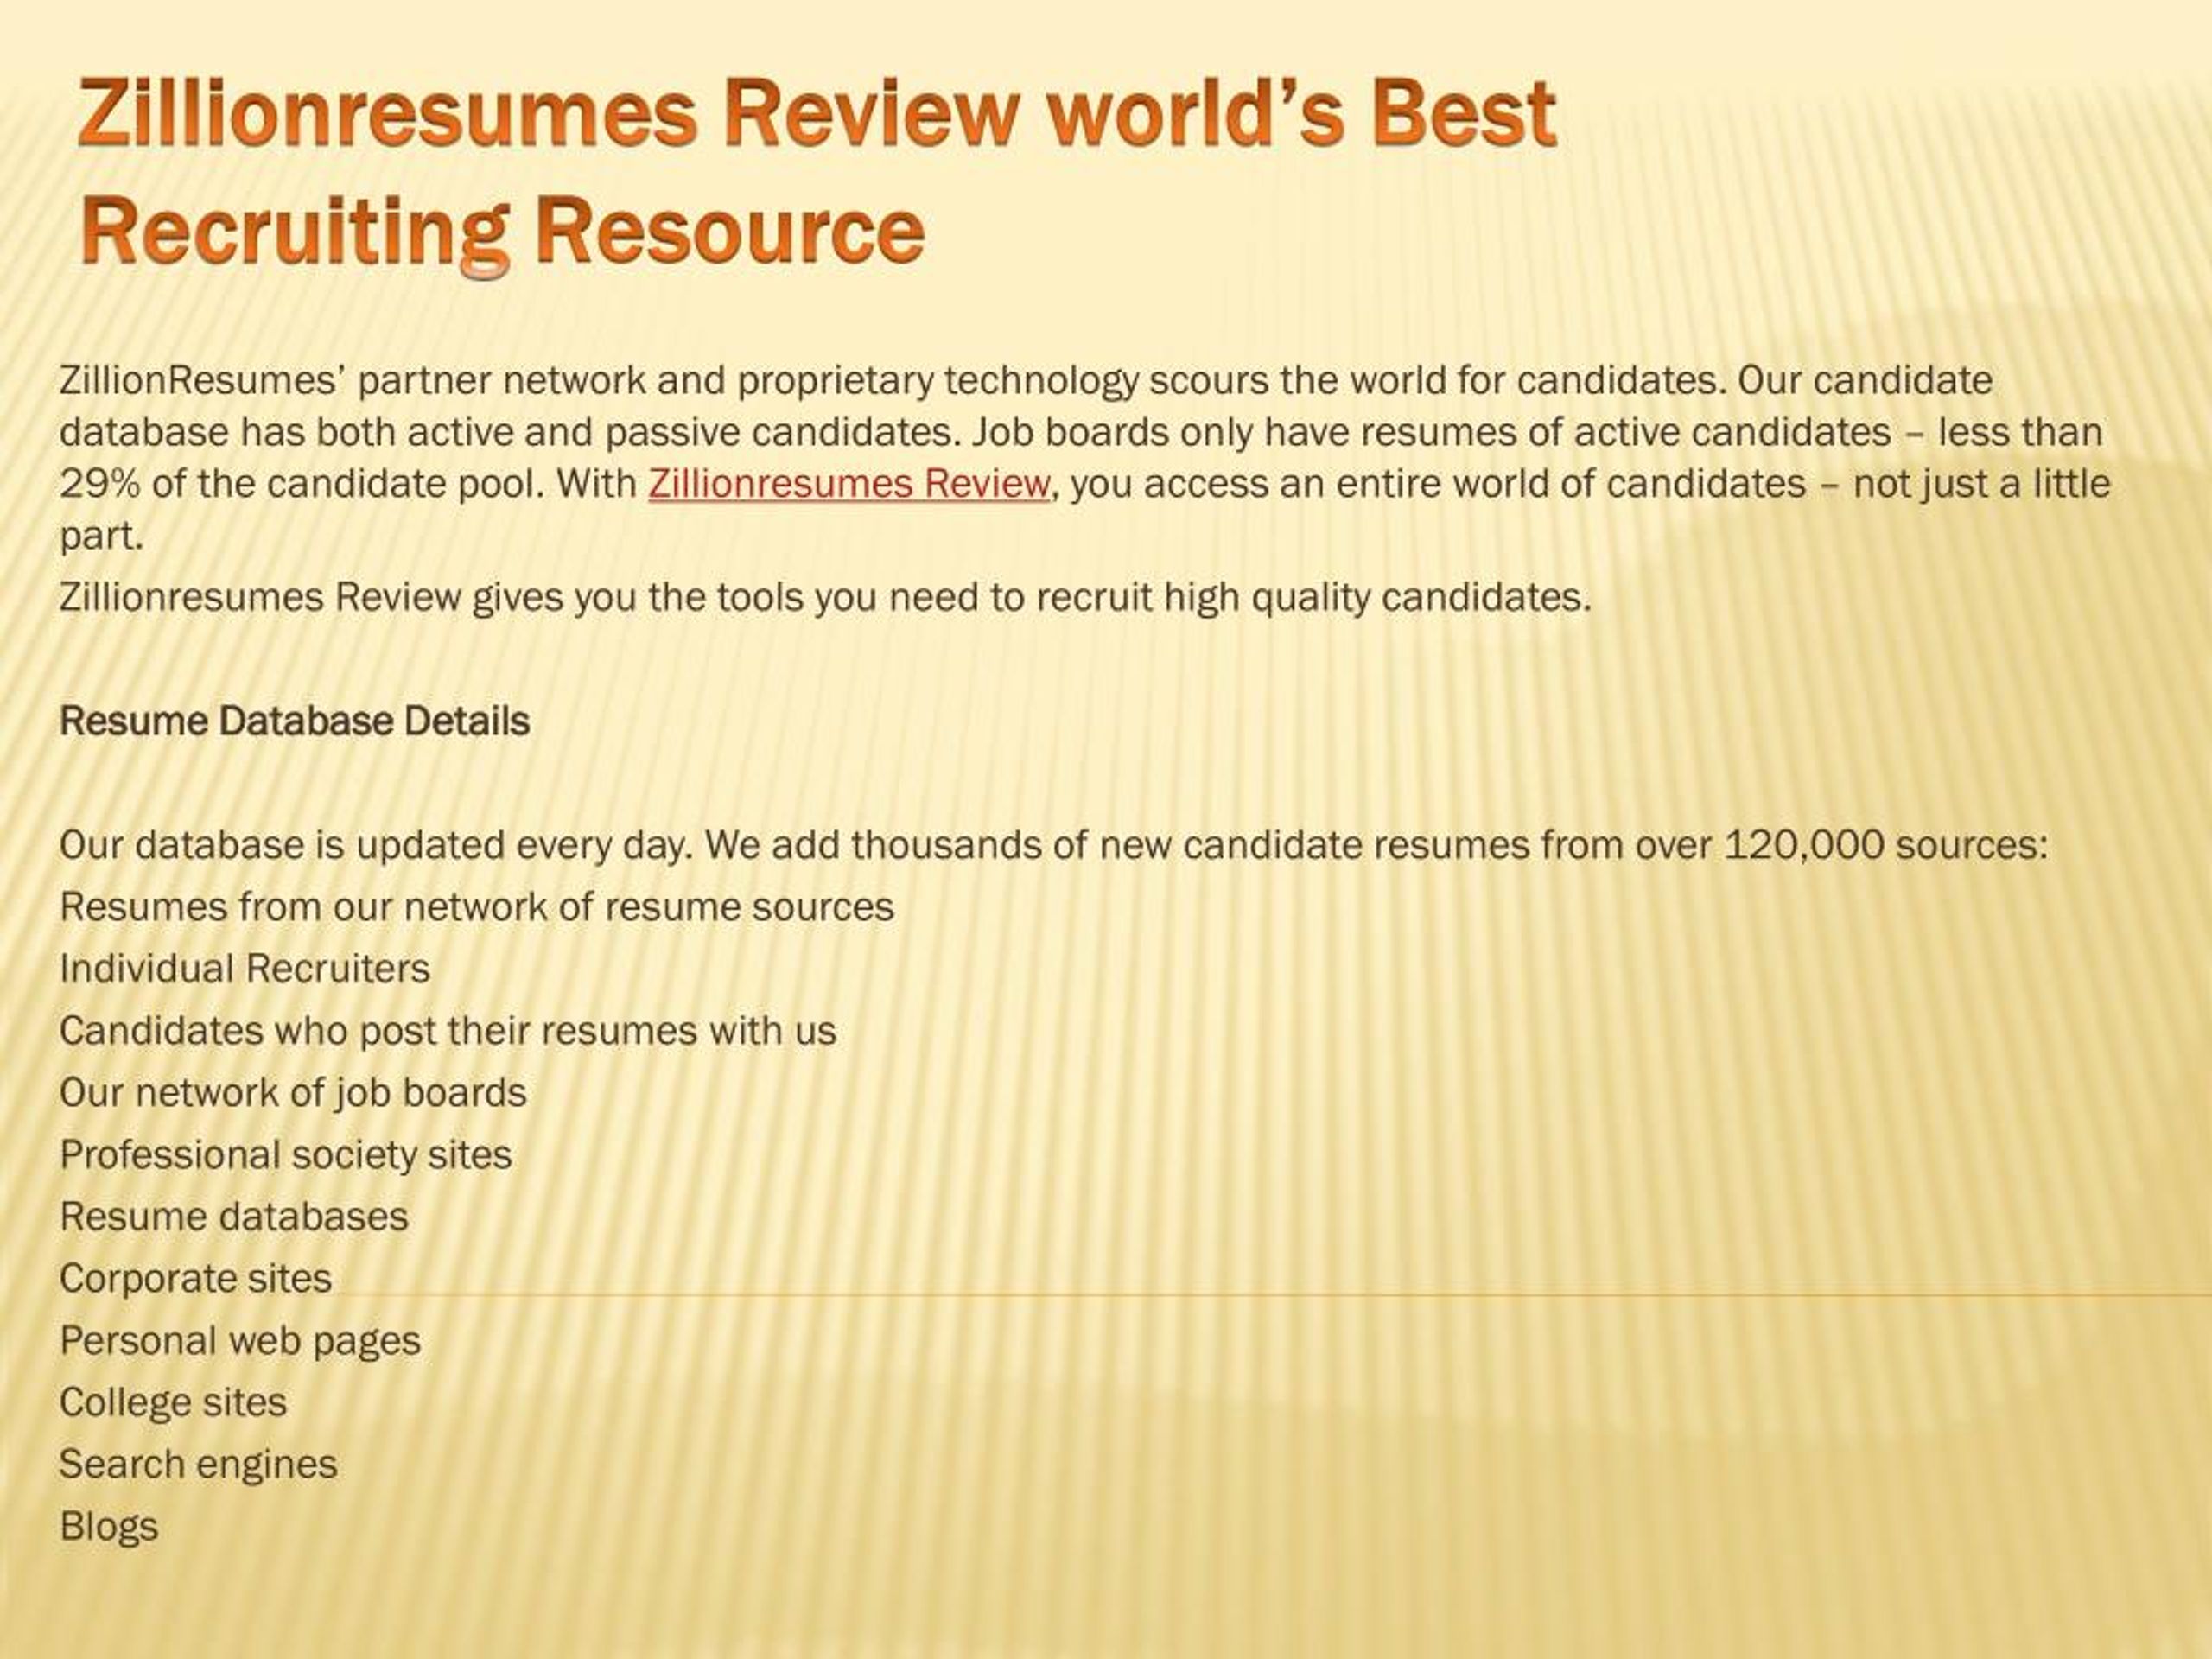 Ppt Zillionresumes Review World S Best Recruiting Resource Powerpoint Presentation Id 7155279